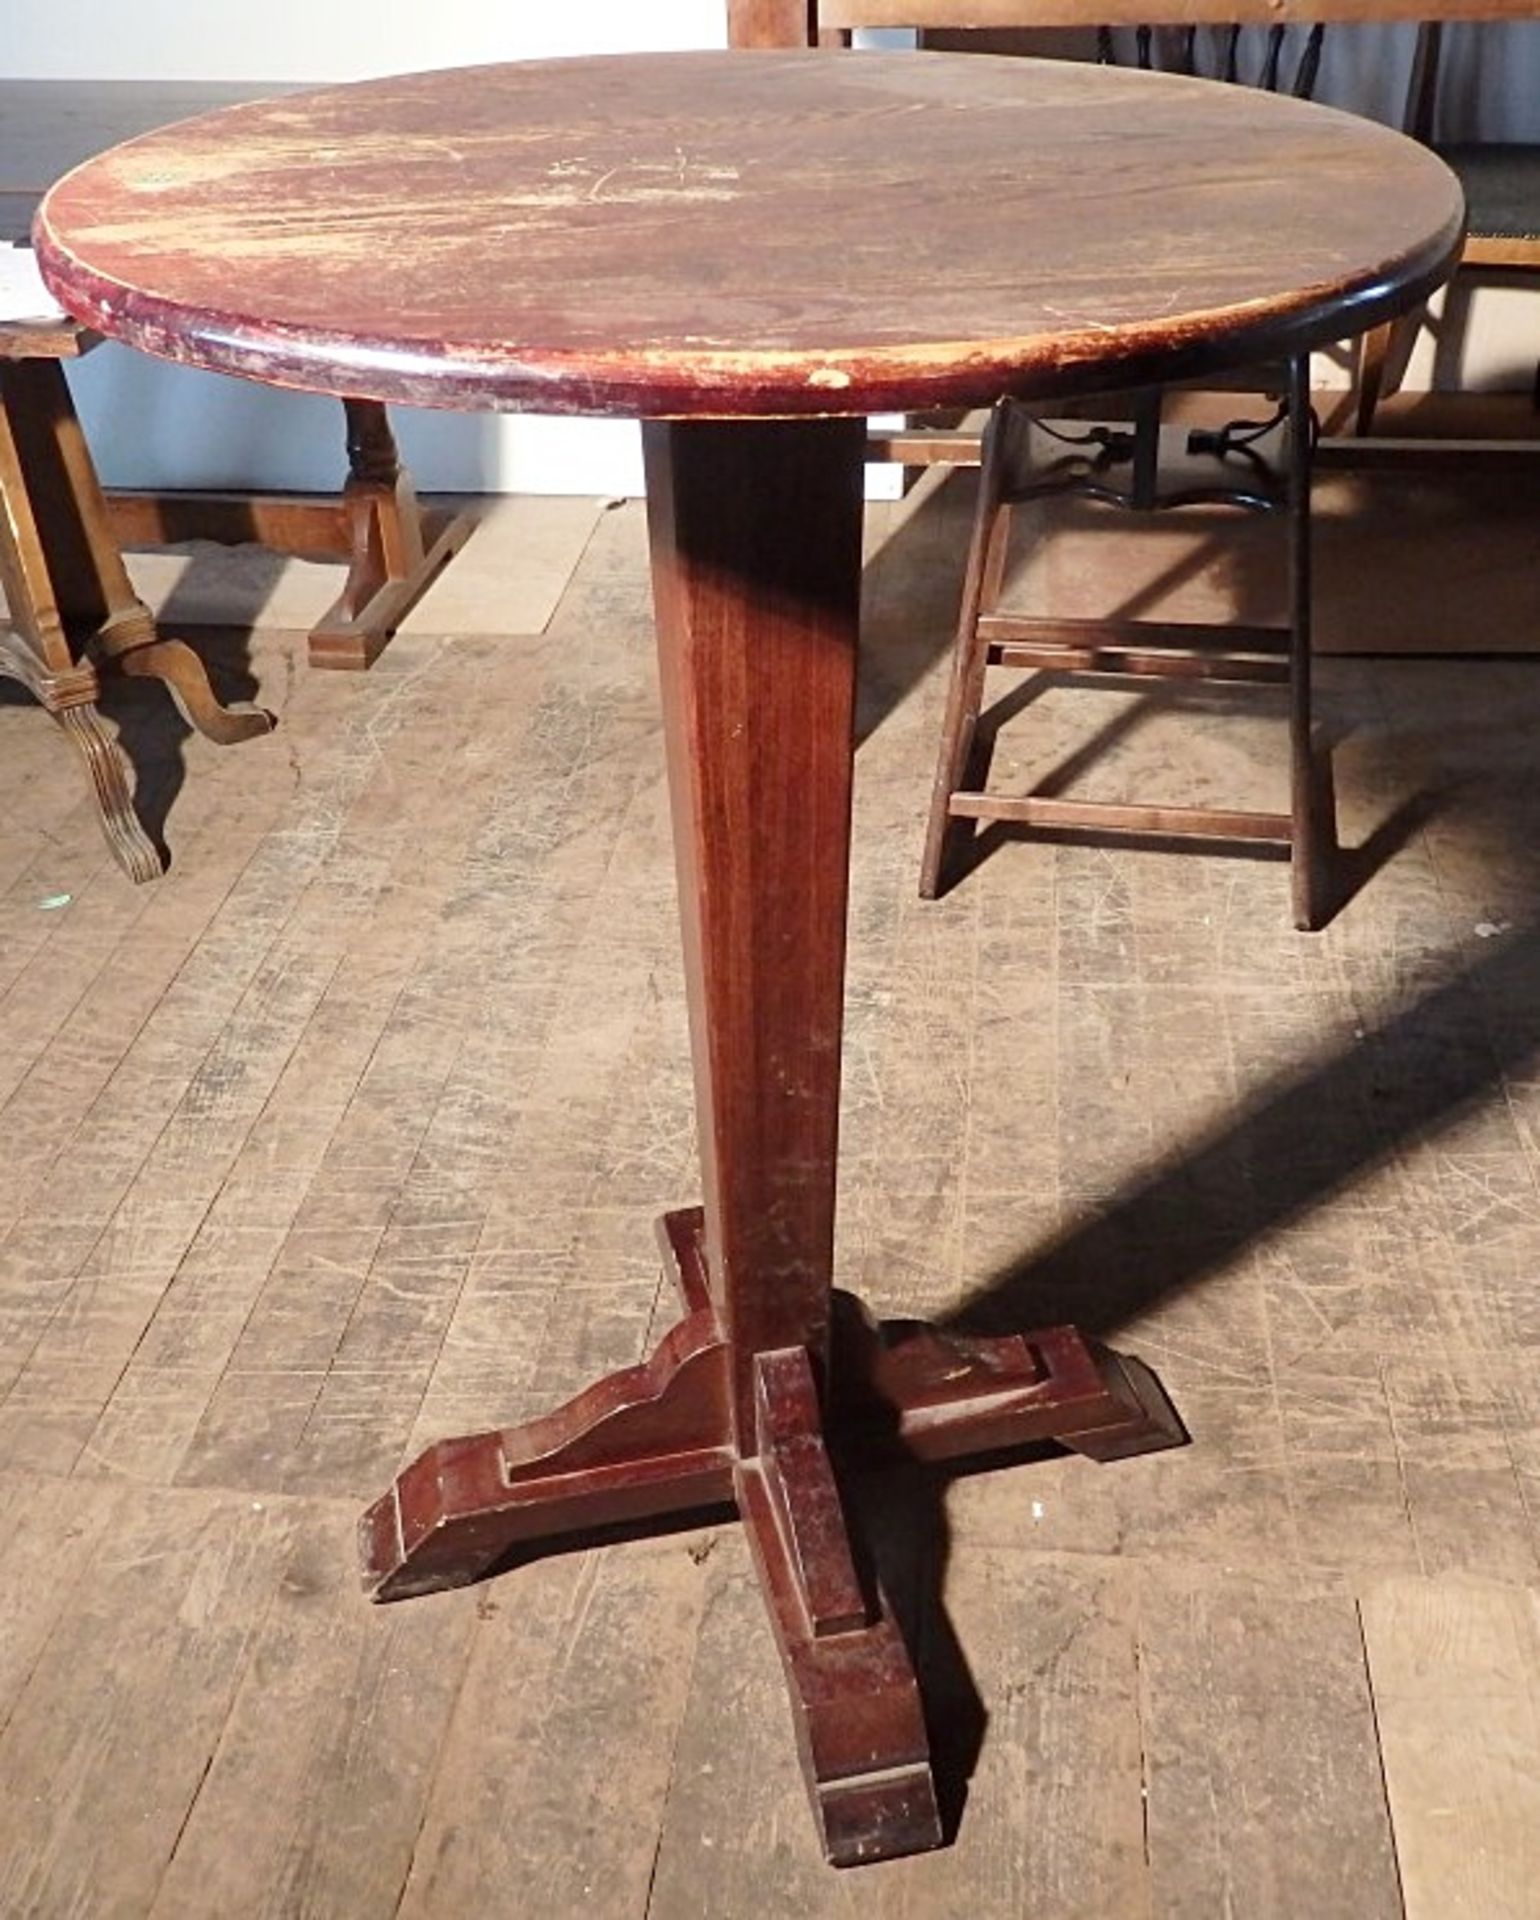 4 x Round Solid Wood Bistro Tables - All Recently Taken From A Bar & Restaurant Environment -